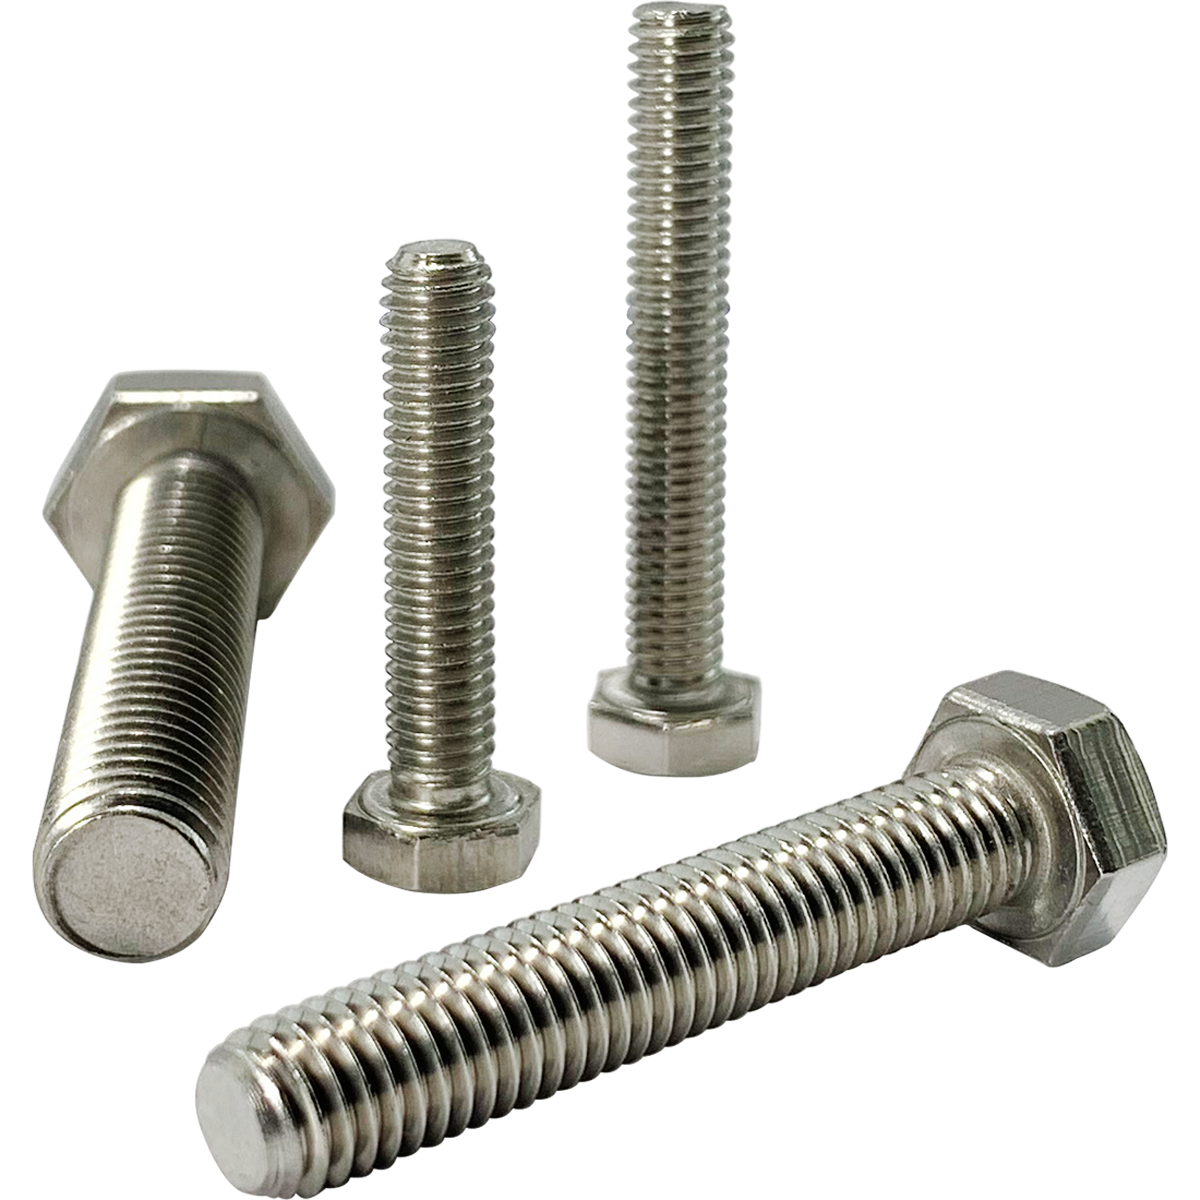 Fully threaded hexagon set screws, also known as fully threaded bolts. Commonly used in mechanical and engineering applications.